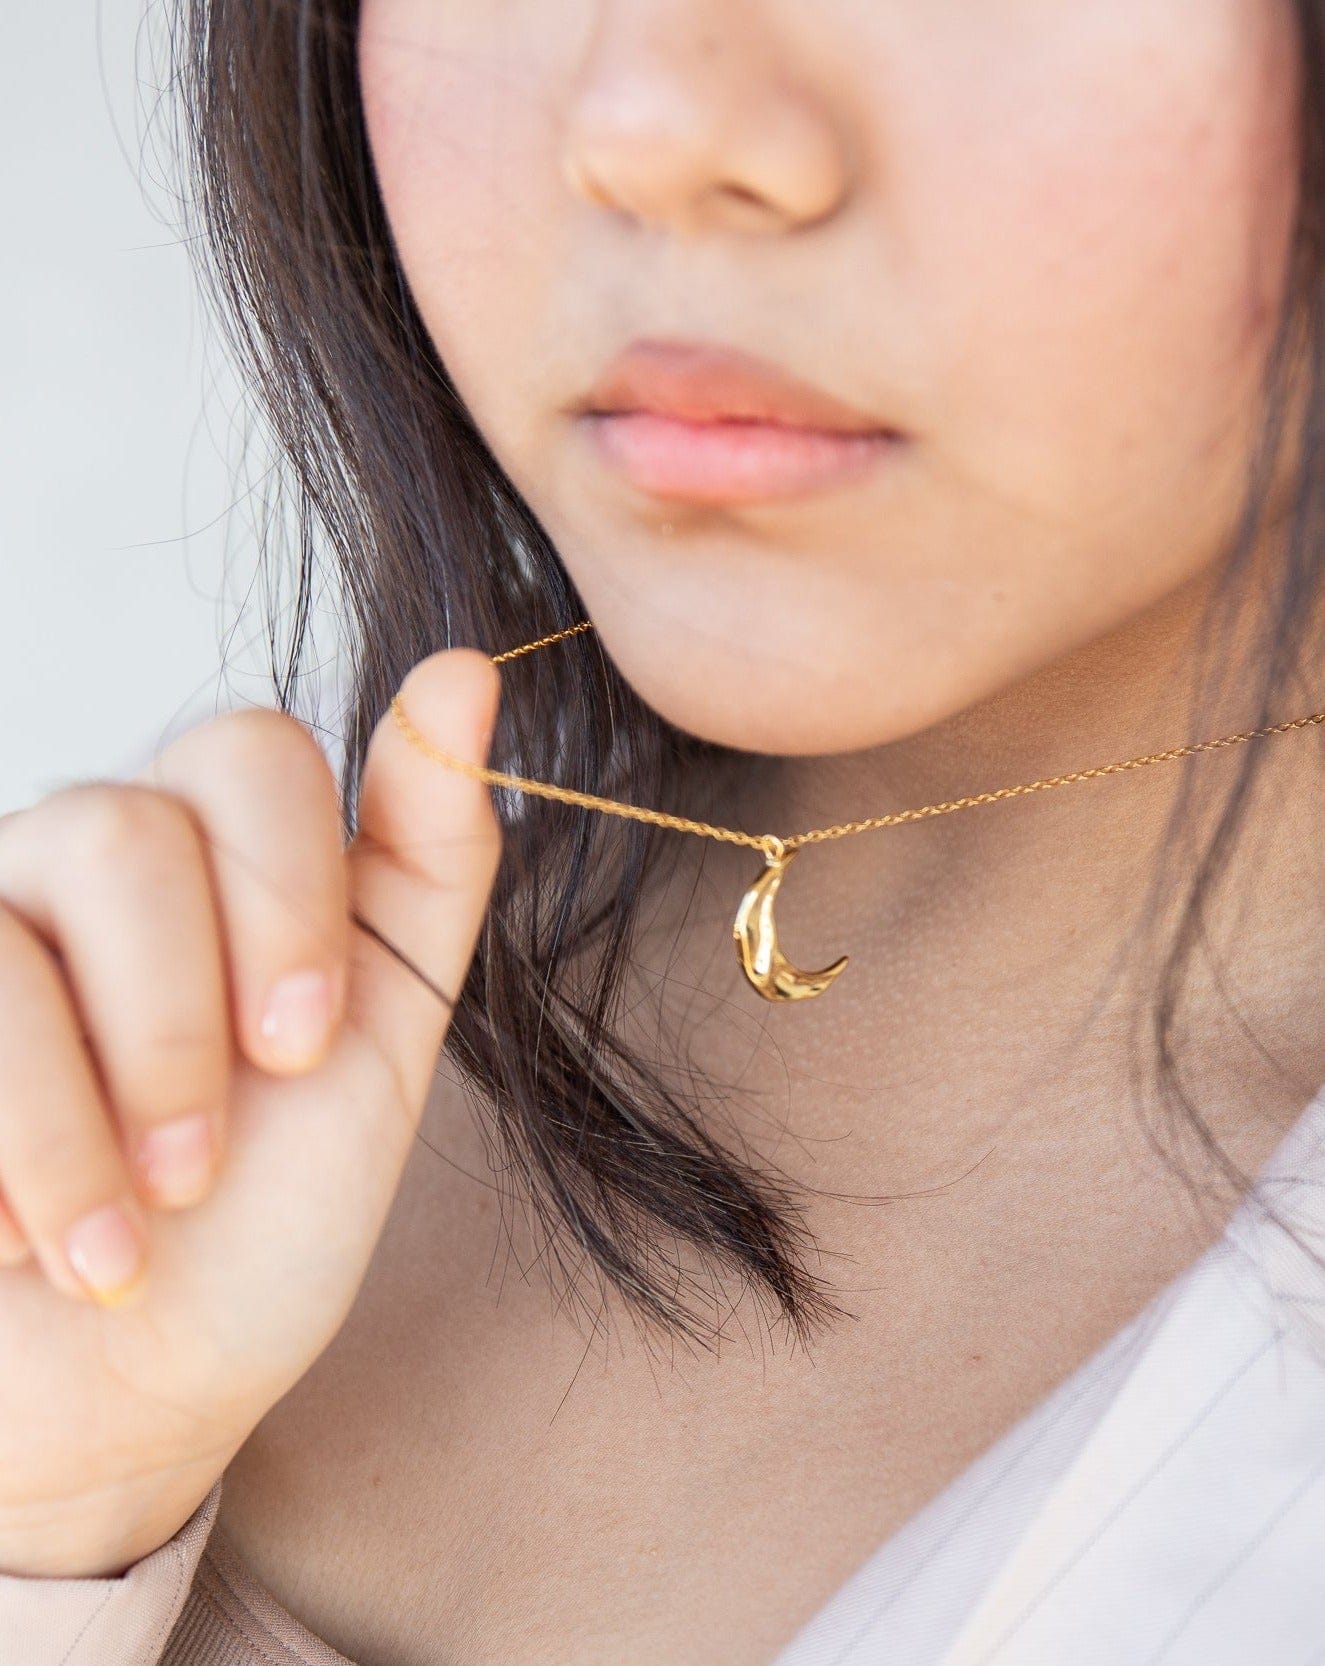 Mingma wearing 18k gold plated sterling silver nolo liquid luna dainty chain link necklace